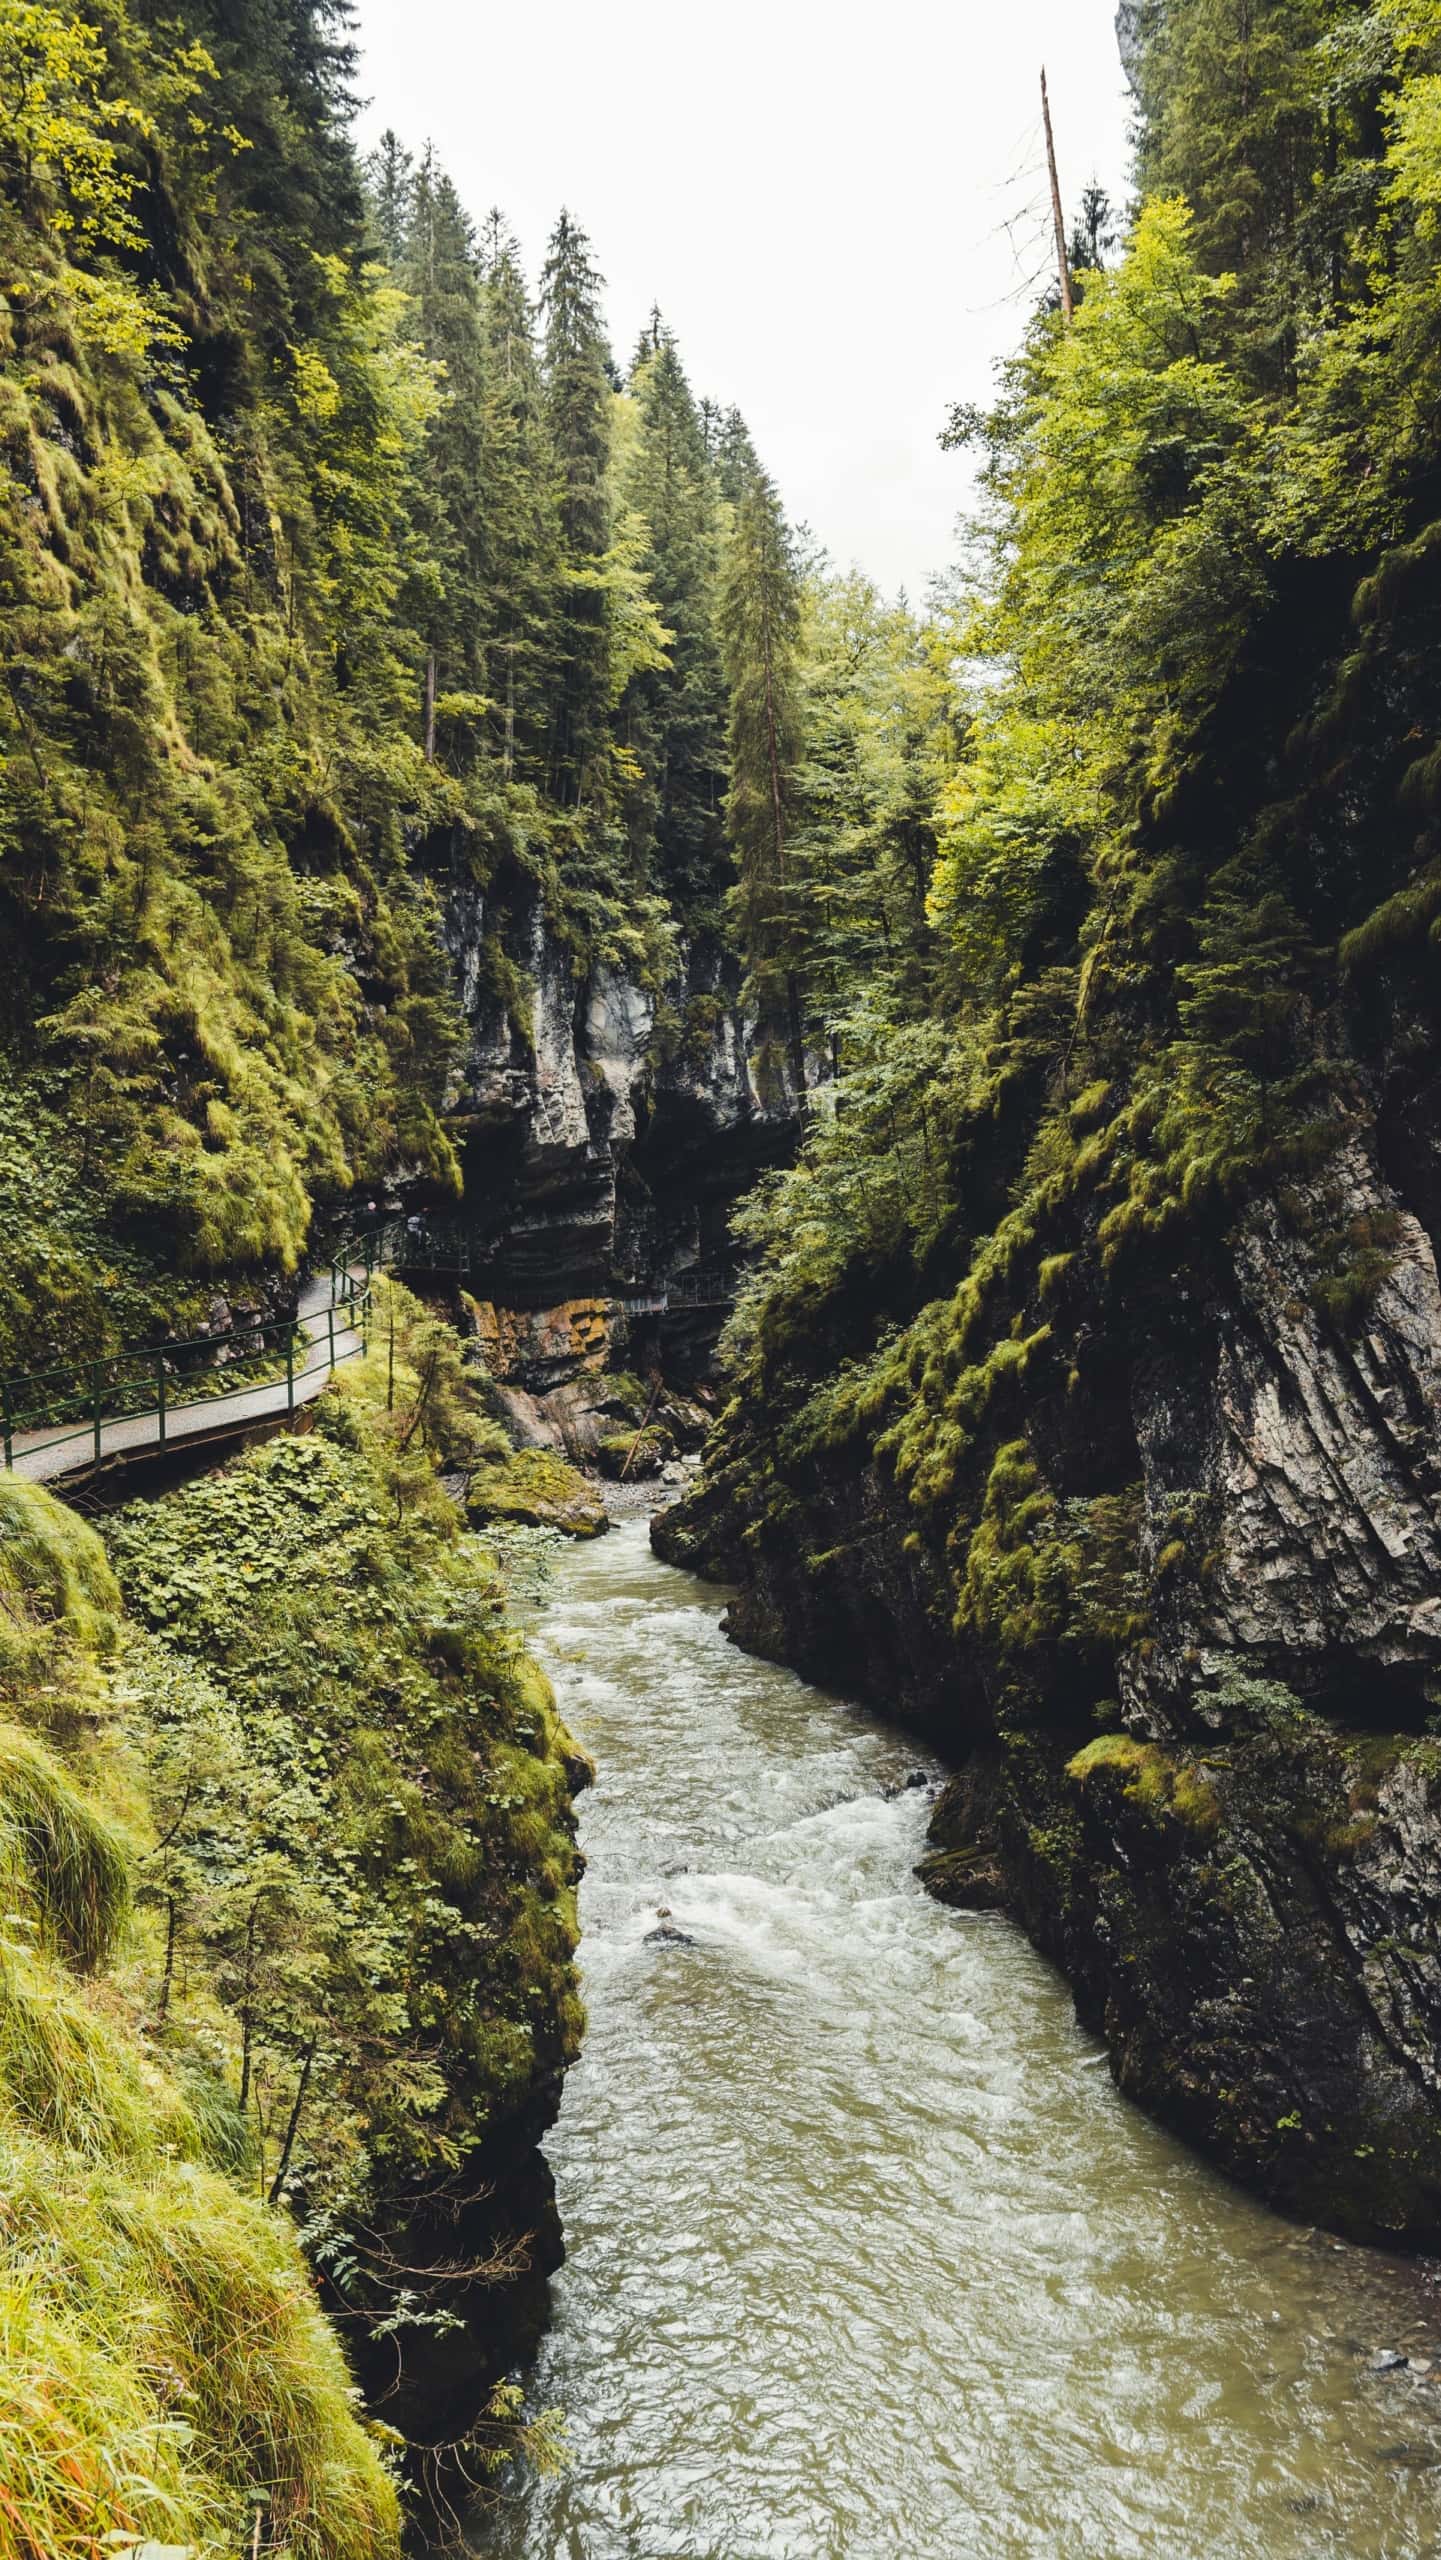 Impressive Breitachklamm Gorge in Bavaria, one of the nature attractions in Germany